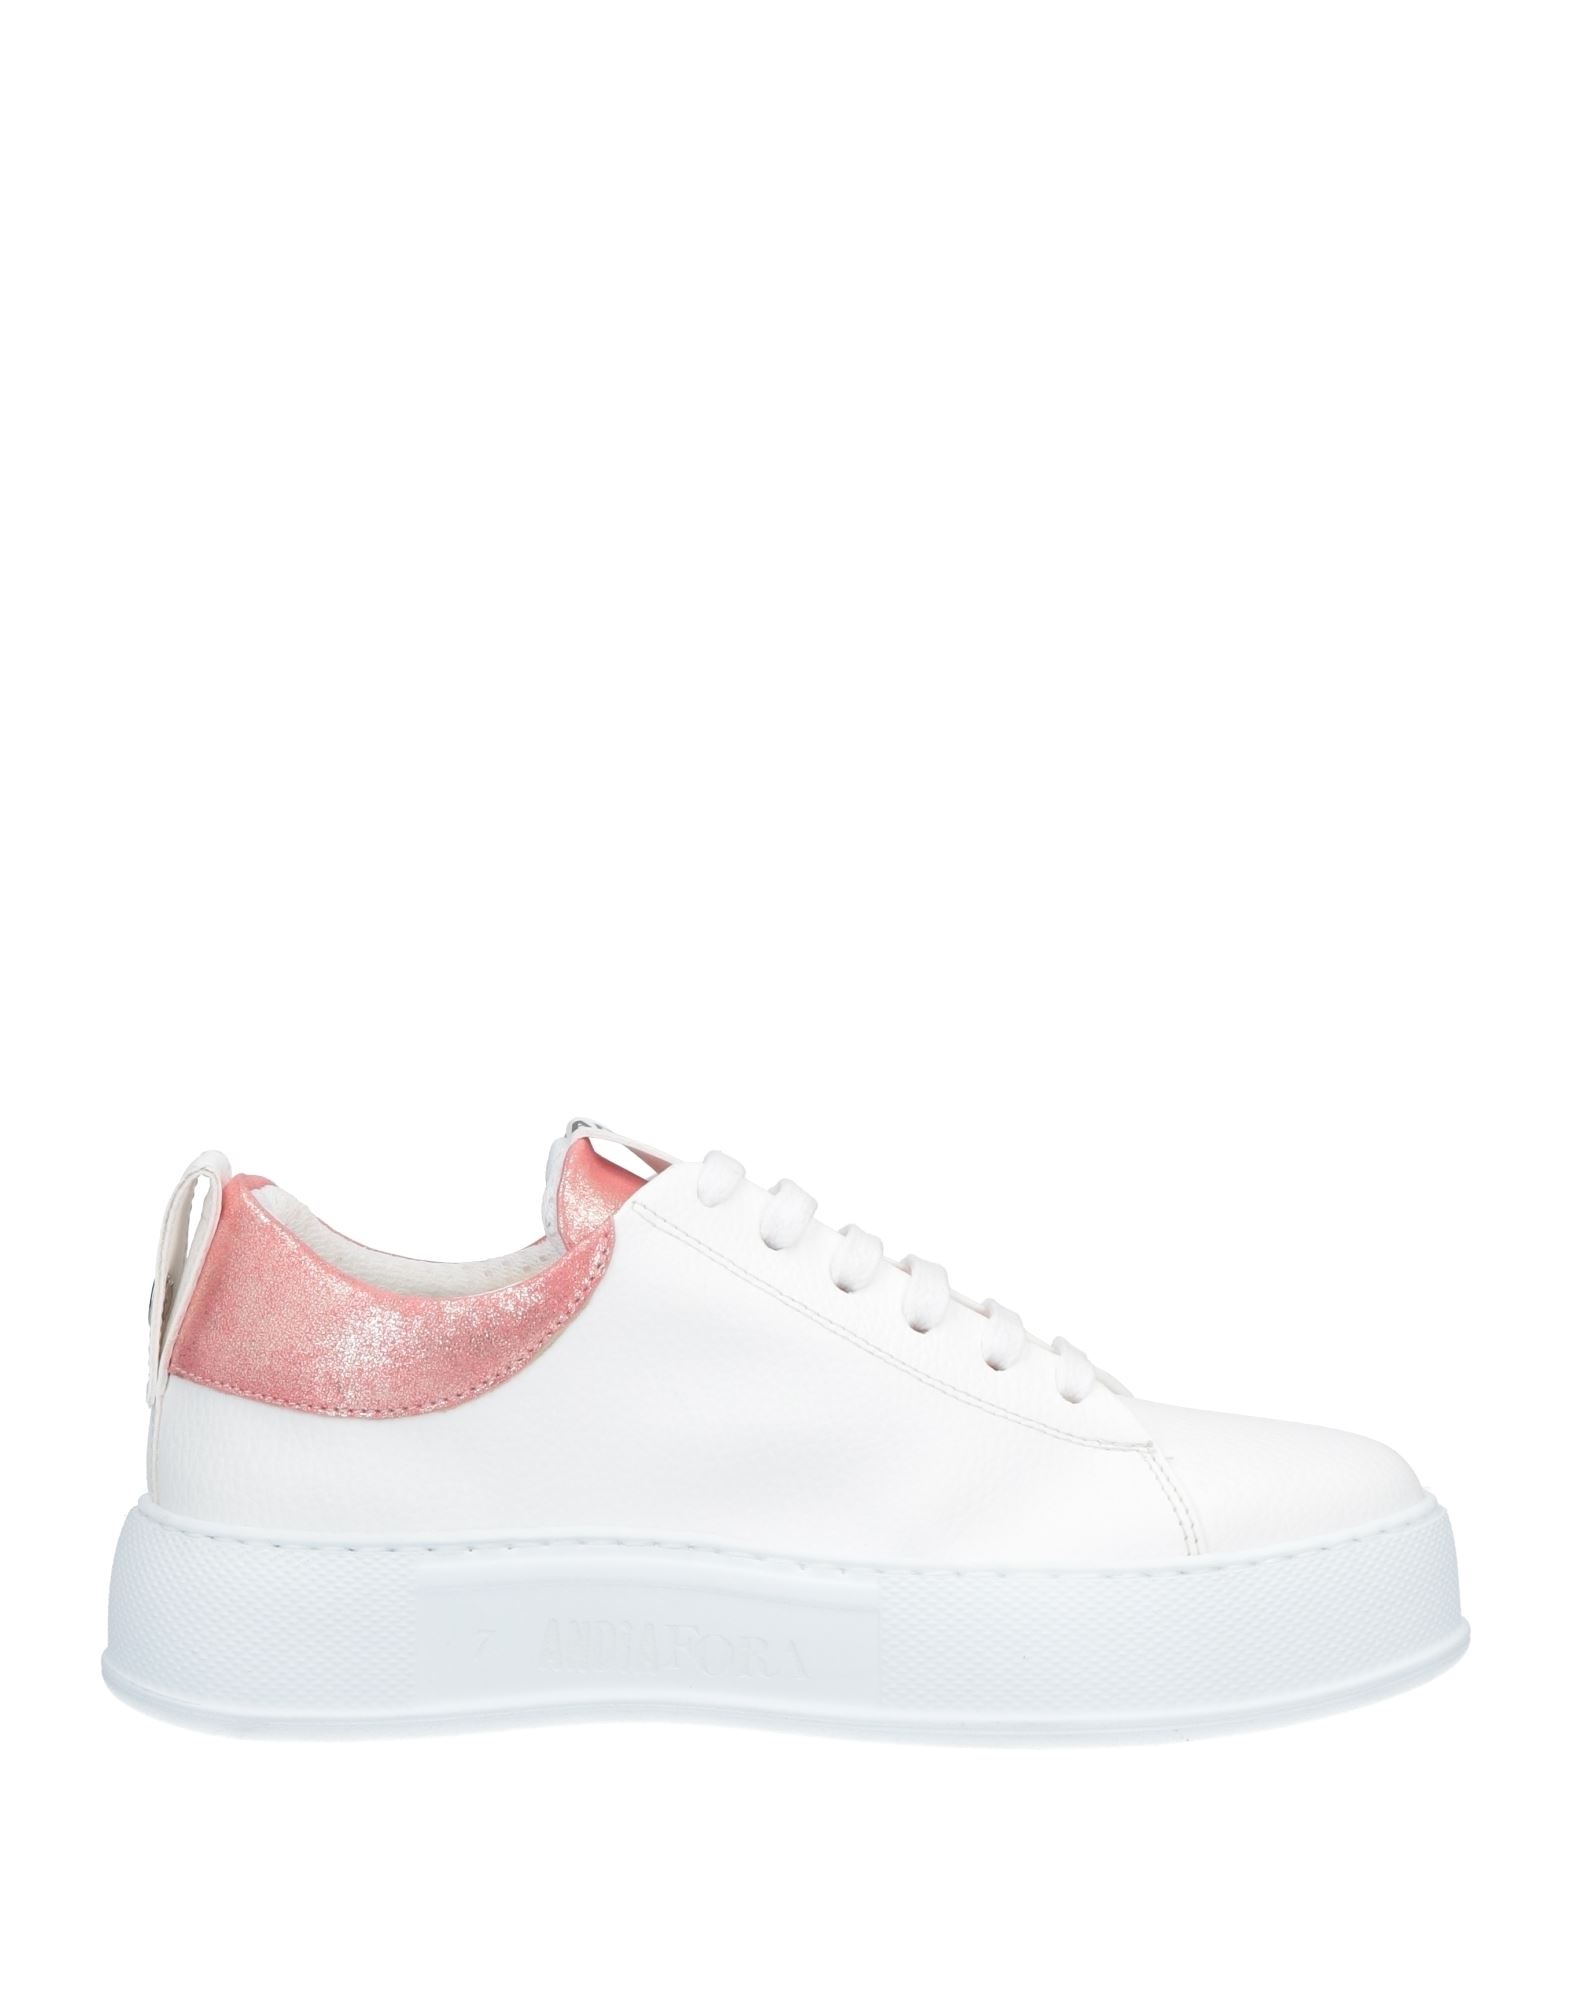 Andìa Fora Woman Sneakers White Size 6 Soft Leather In Pink